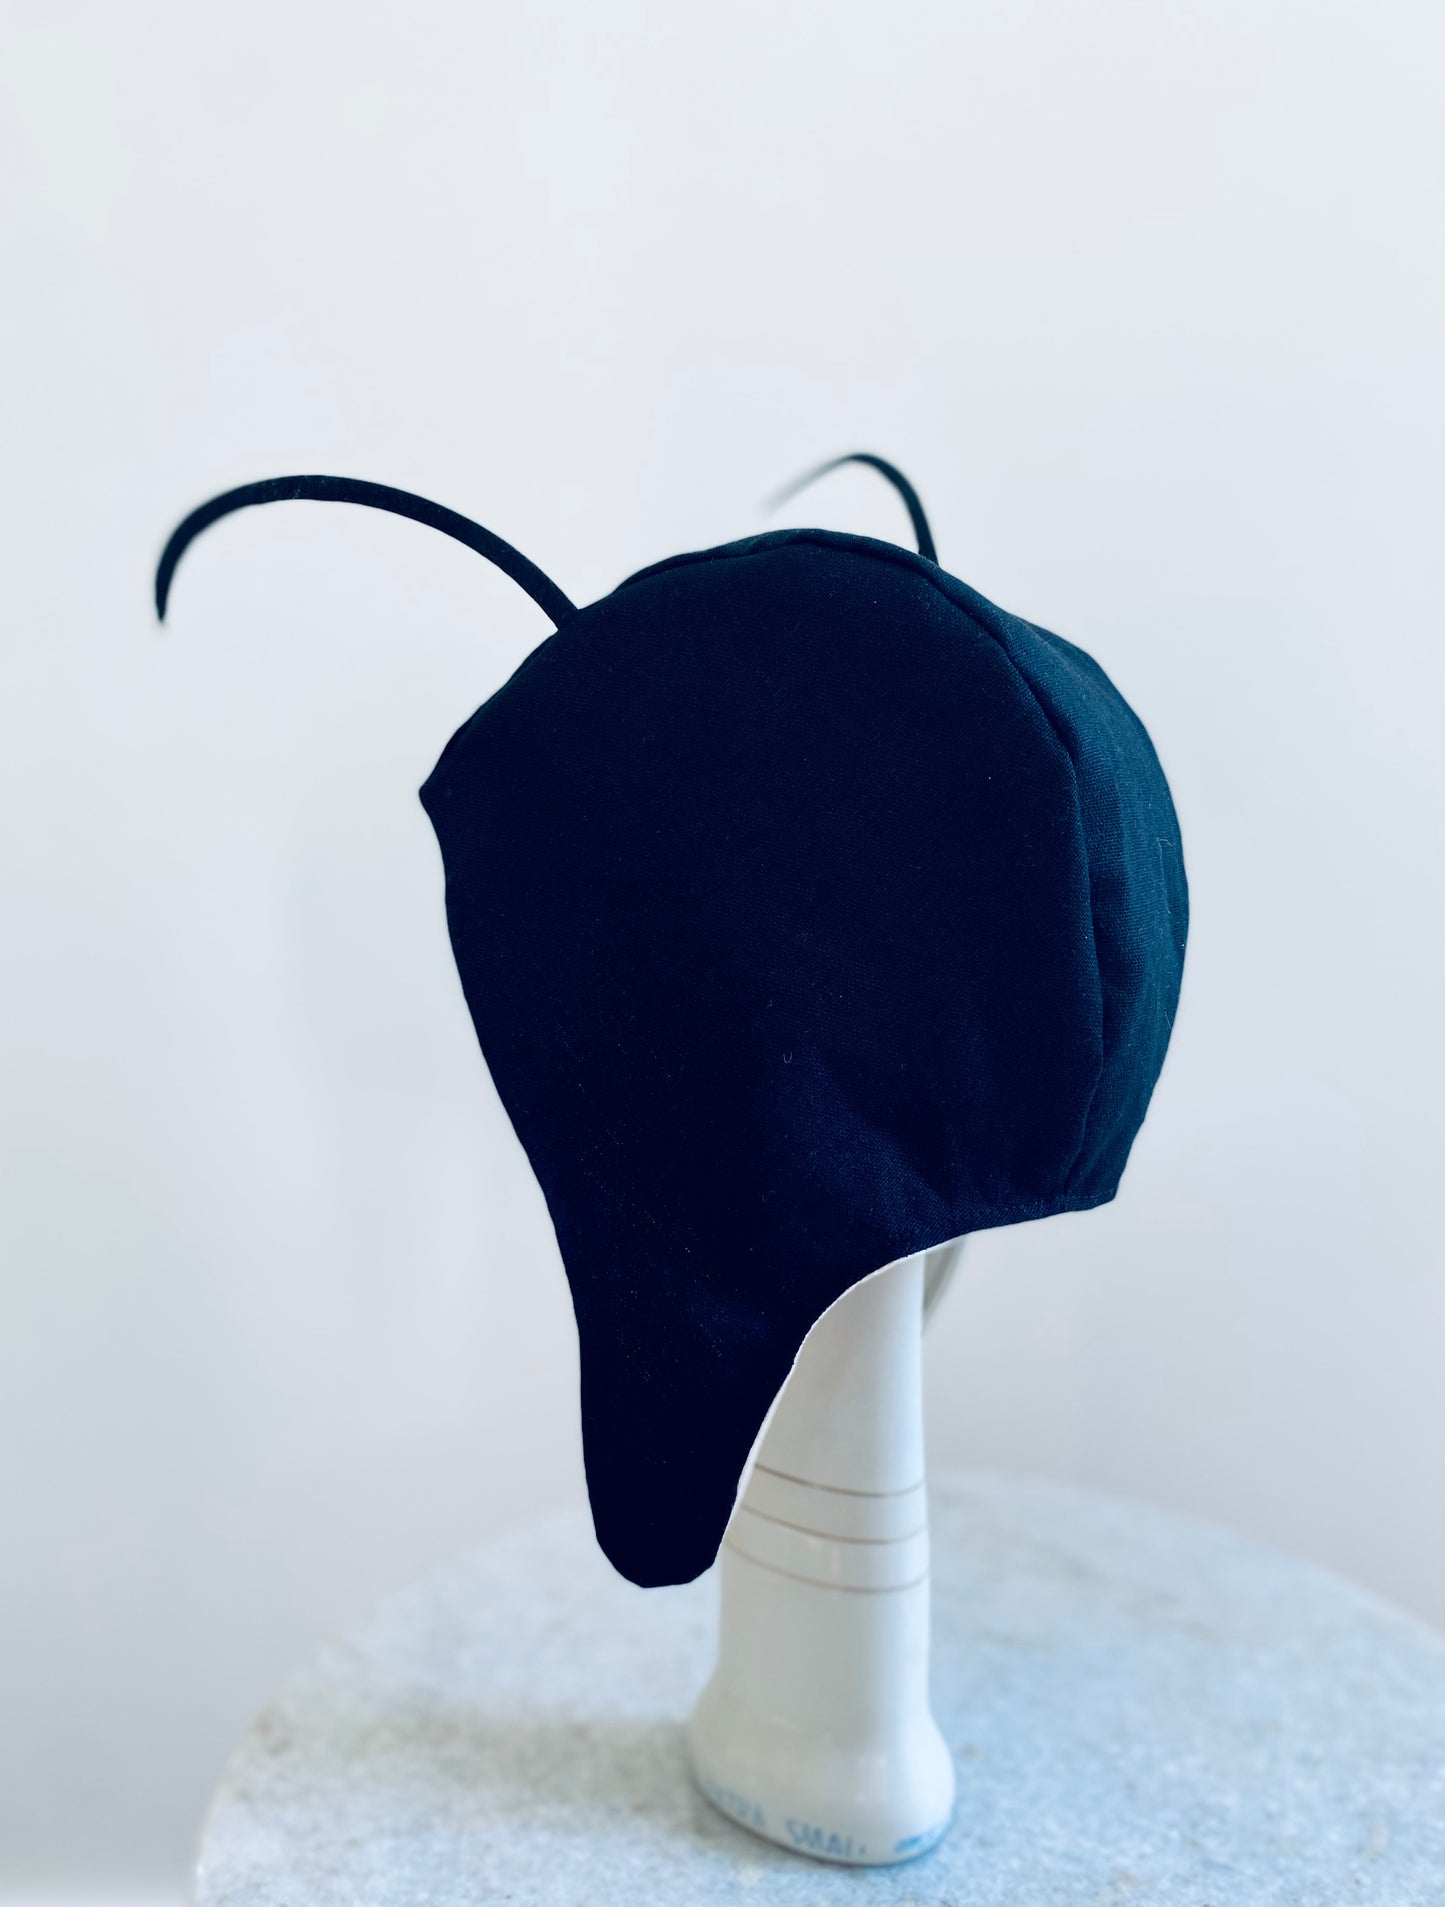 Black antennae for butterfly or ladybug costume.